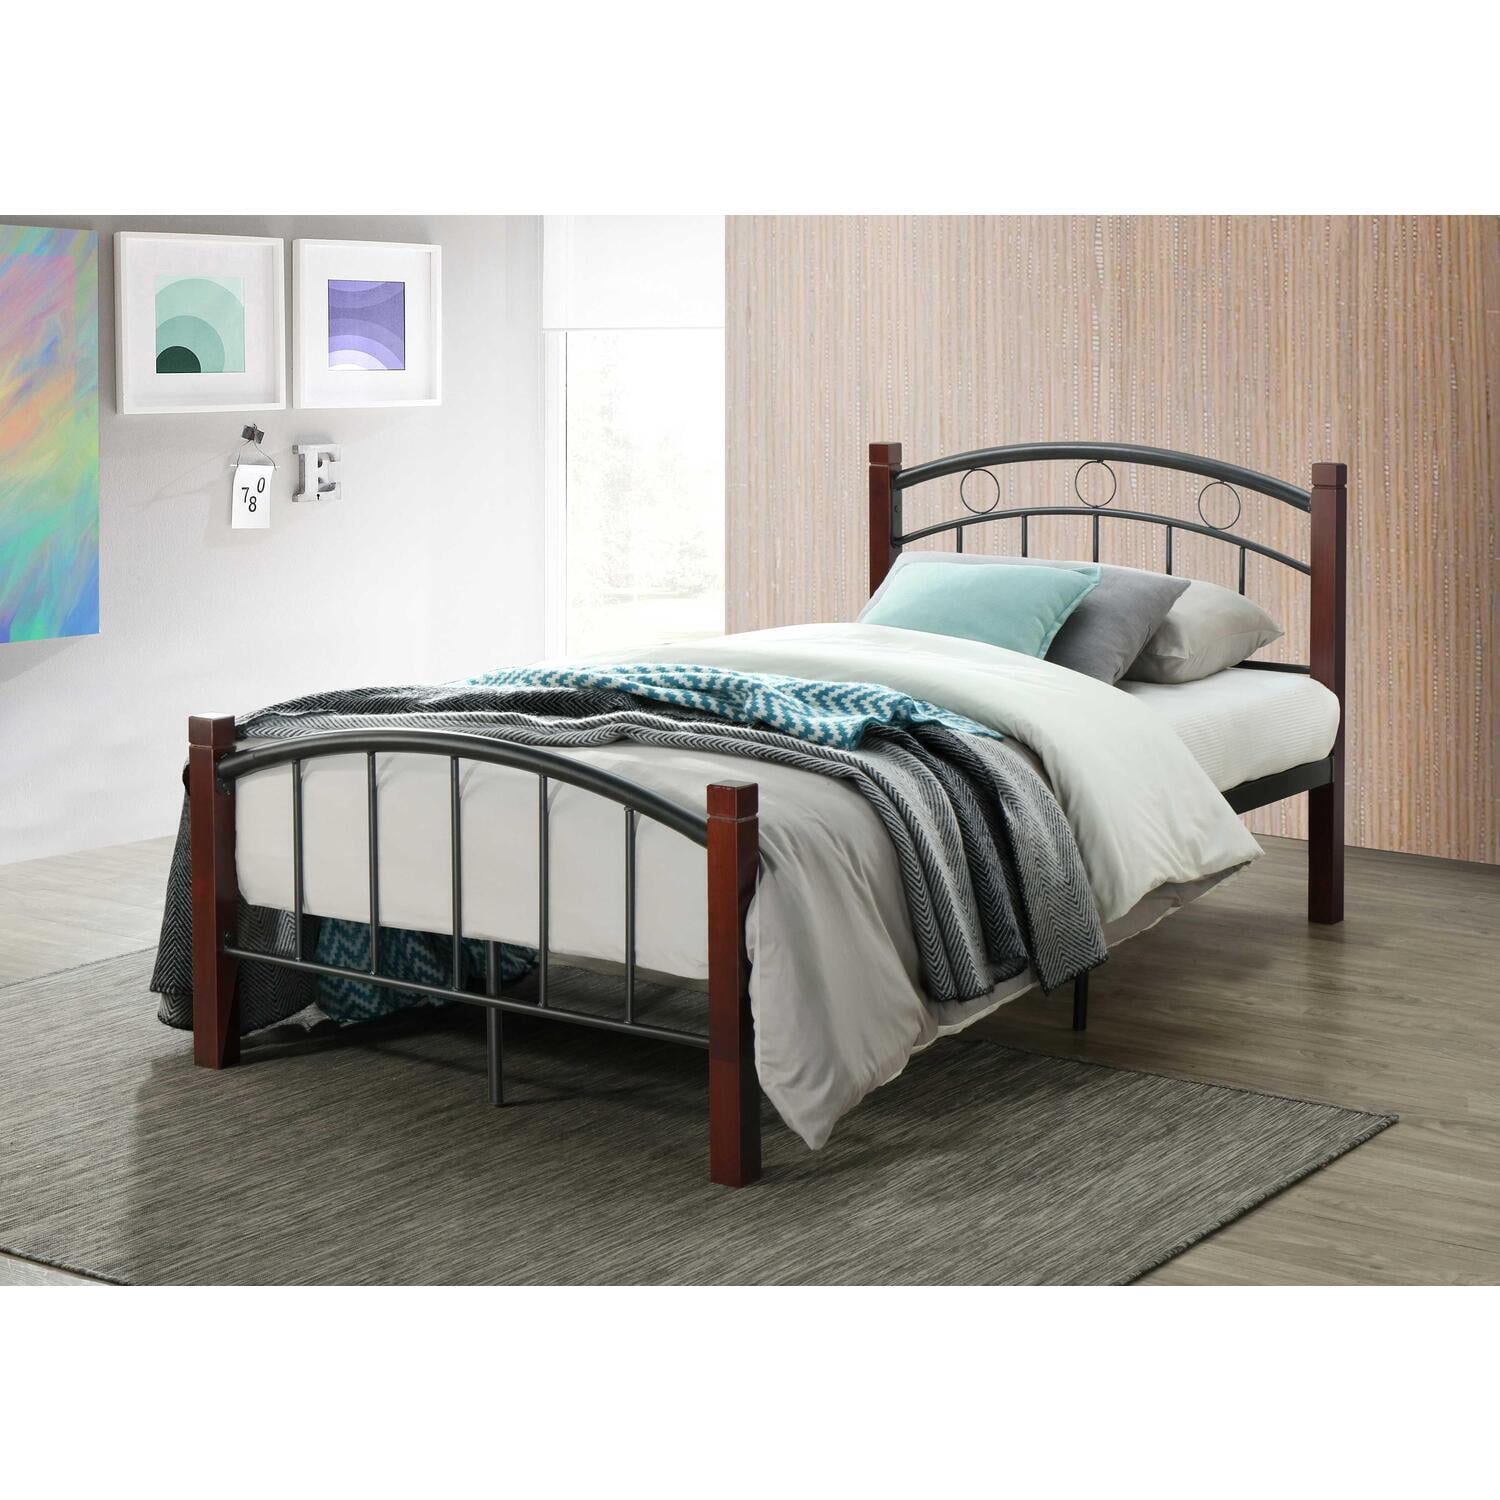 Hodedah Complete Metal Bed With, Bed Rails For Full Size With Headboard And Footboard